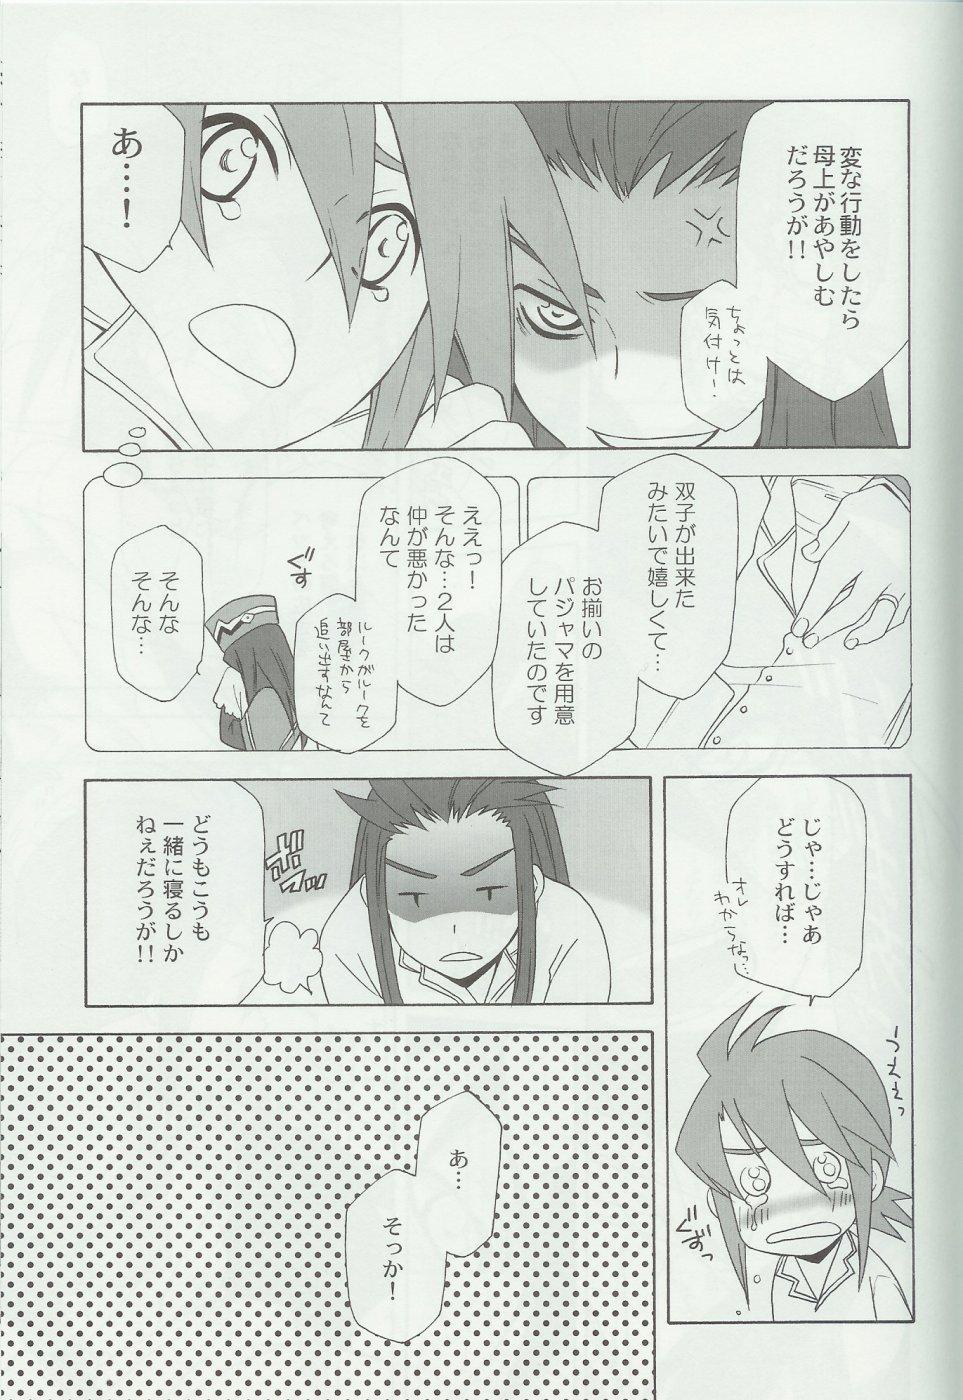 Tesao flirt - Tales of the abyss Homosexual - Page 6